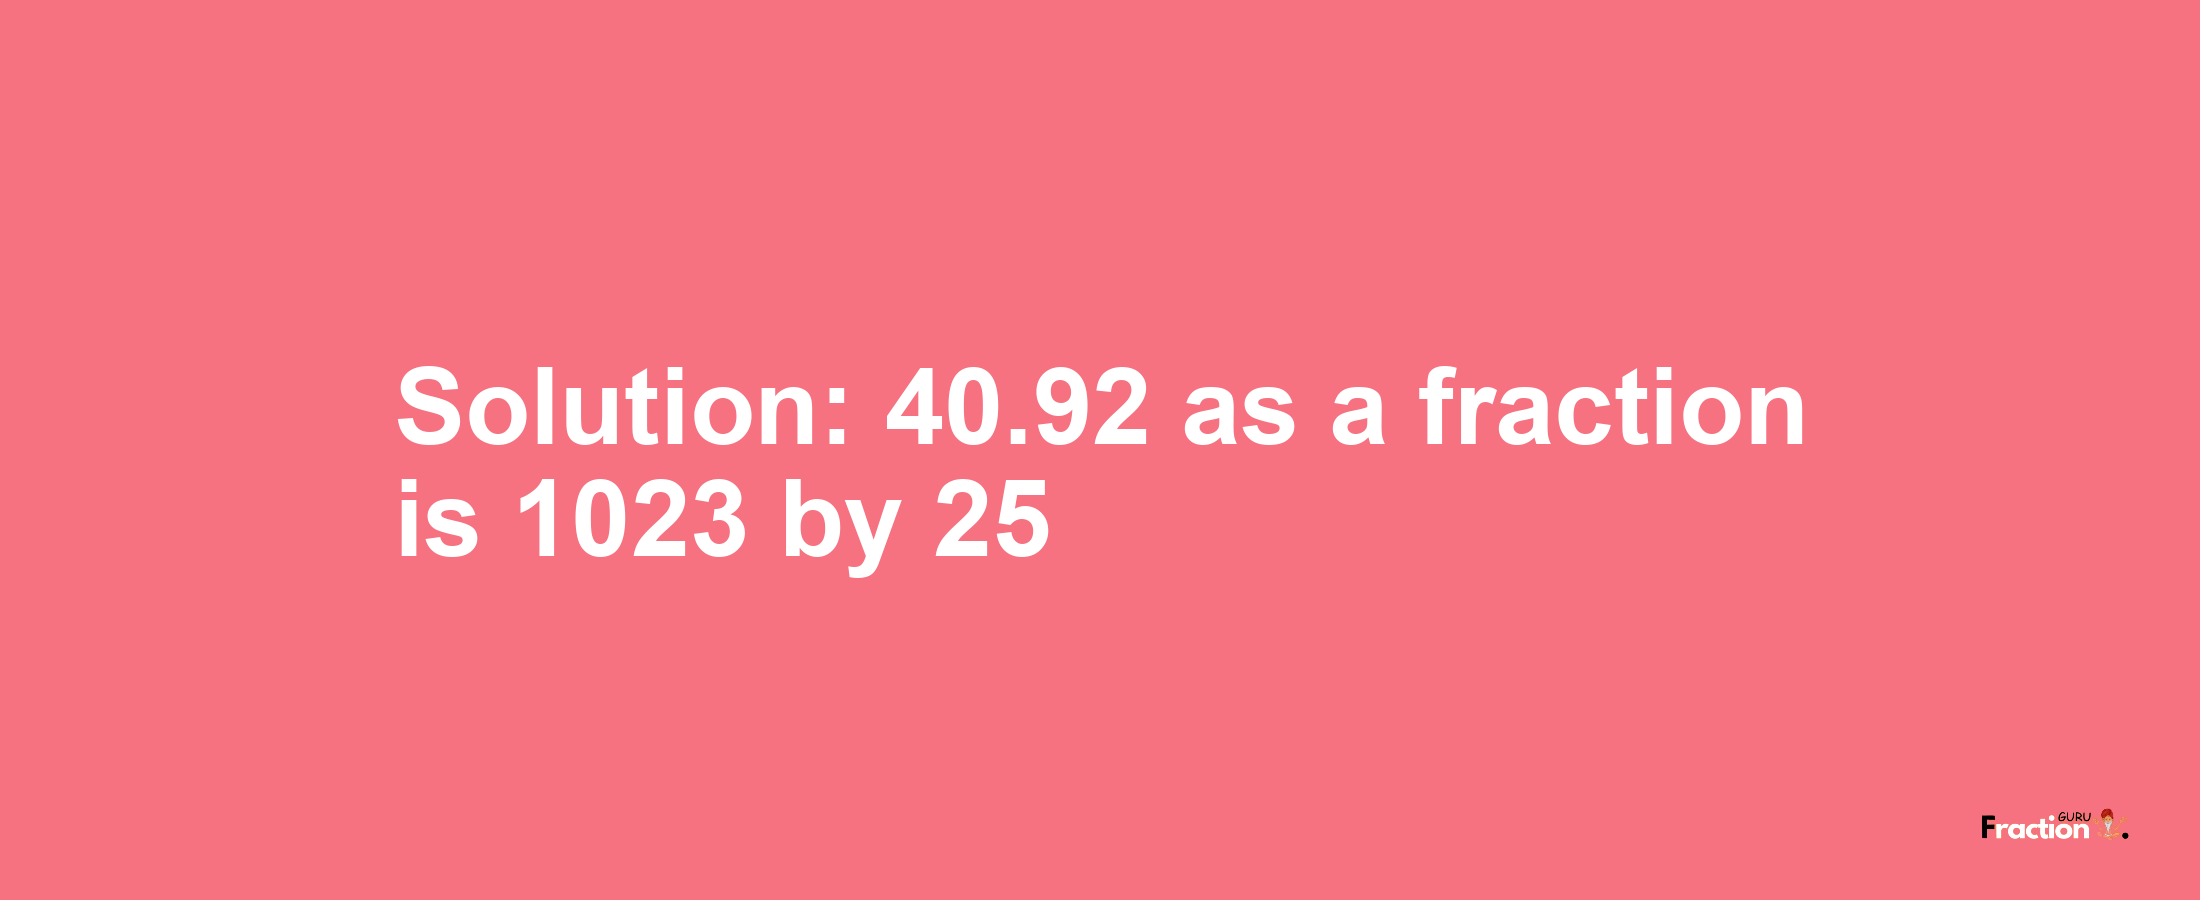 Solution:40.92 as a fraction is 1023/25